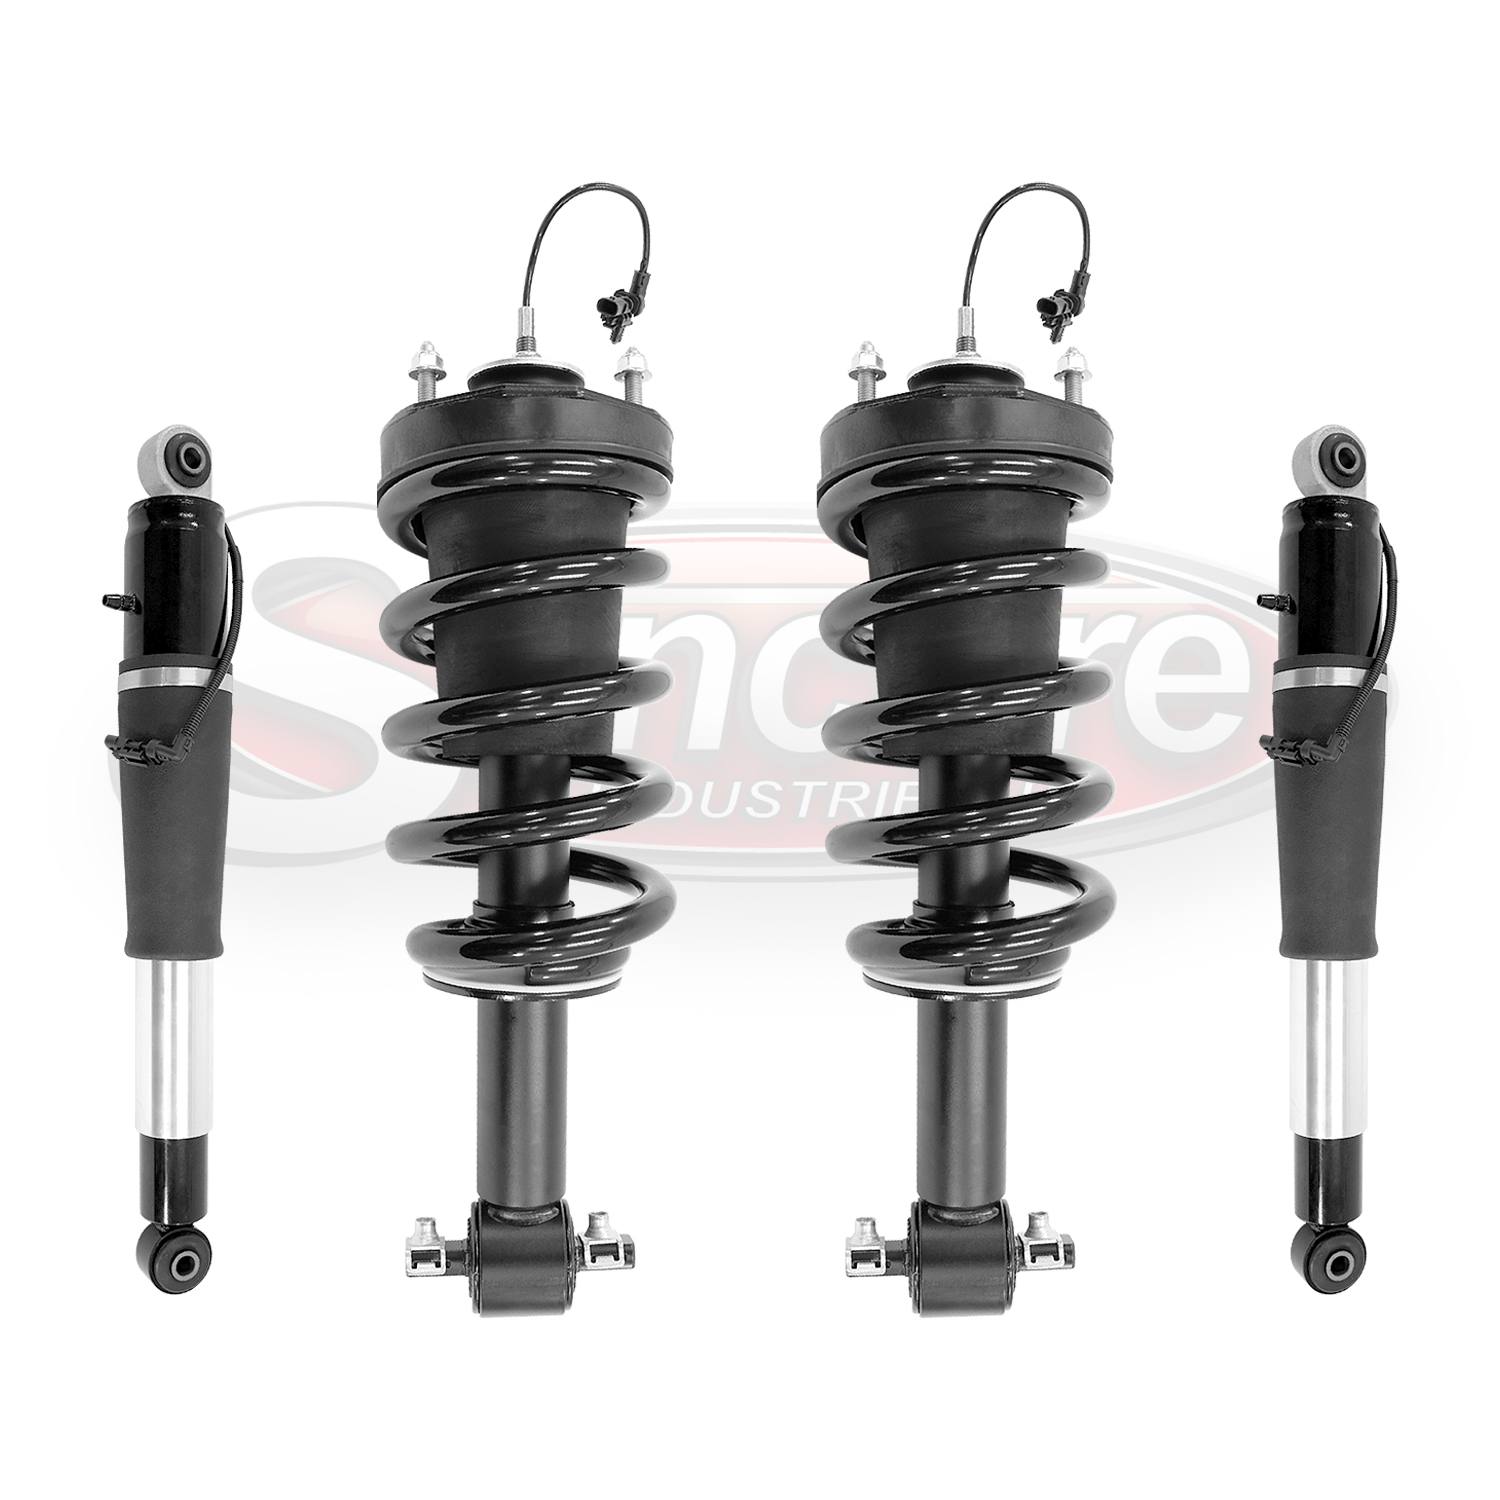 2015-2020 Escalade Suburban Tahoe Yukon Magneride Suspension Electronic Front Complete Strut Assemblies & Rear Air Shock Absorbers